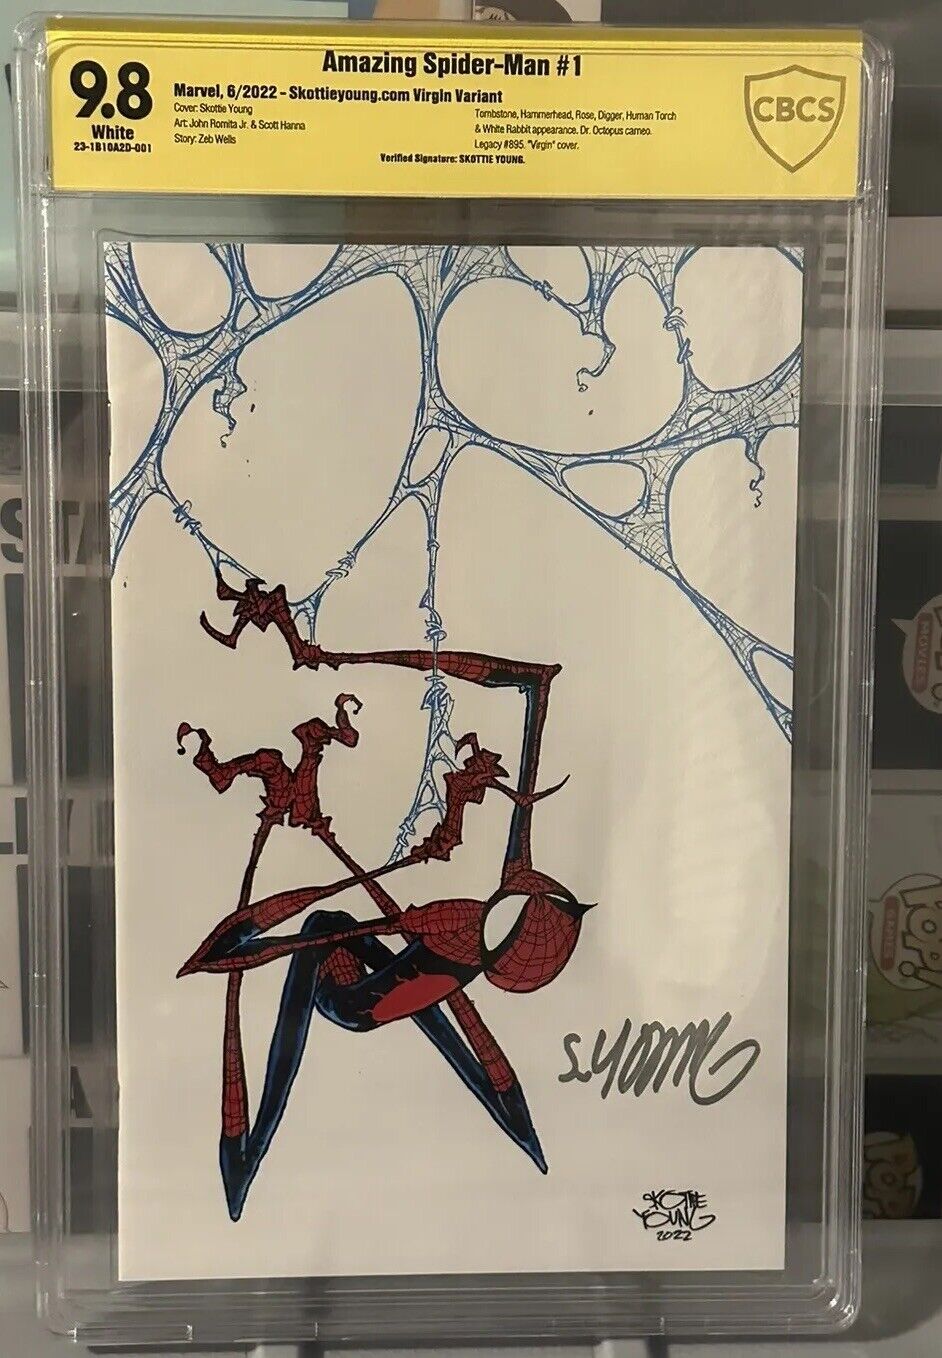 Amazing Spider-Man #1 CBCS 9.8 Signed Skottie Young Web Excl Virgin Cover Marvel